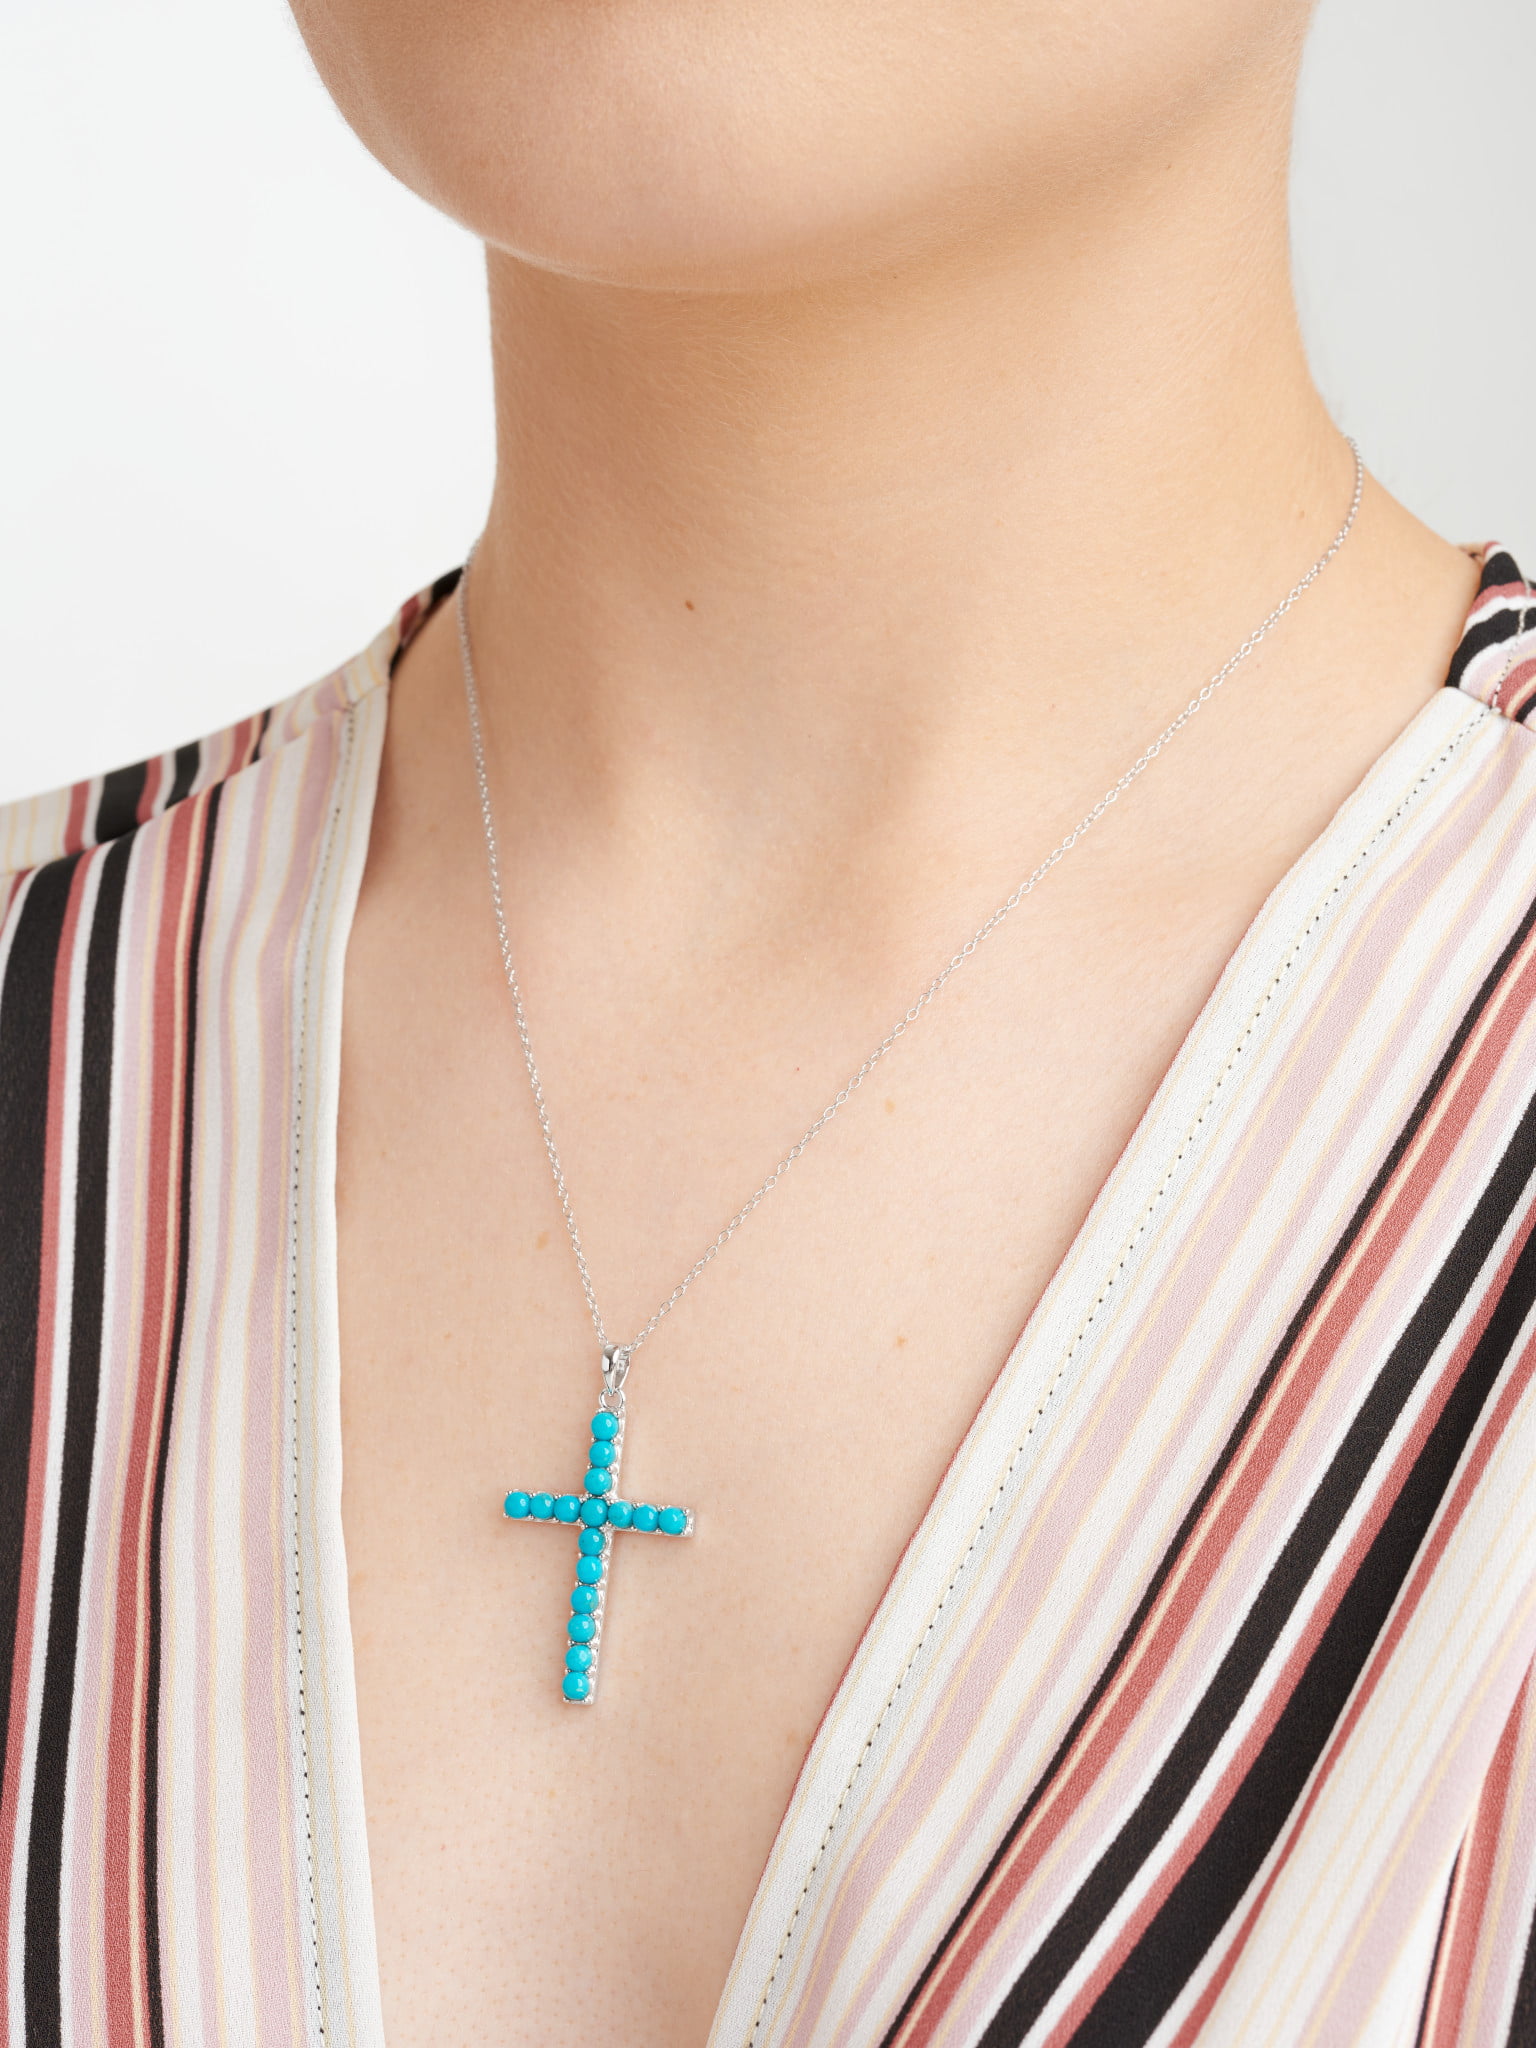 JEWELRY :: Necklaces :: Women Necklaces :: Turquoise Cross Necklace with  Gold Chain - Christina Christi Handmade Products